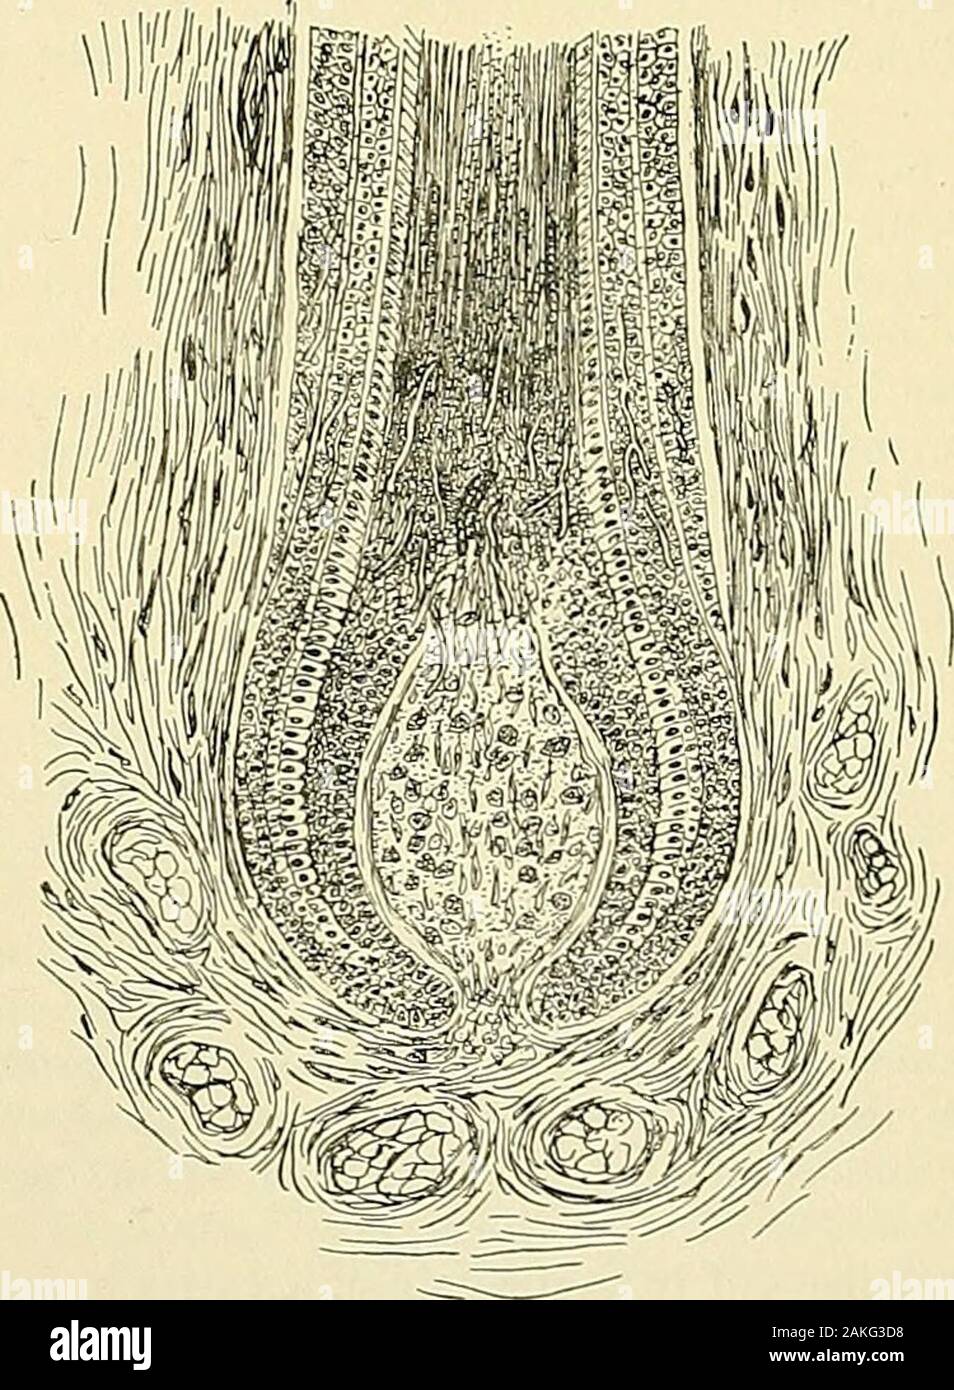 An American text-book of genito-urinary diseases, syphilis and diseases of the skin . re-viously stated, is rare, the morbid anatomy corresponds to the condition metwith in kerion; in other words, there is a suppurative inflammation of thehair-follicles, caused by the trichophyton fungus. A peculiarity of the fungus when it attacks the beard is that it penetratesdeeply into the follicle, involving the bulb often before the free shaft showsany impairment, although Besnier2 speaks of a case in which the shaft alonewas diseased, showing the usual characters of tinea tonsurans, without pre-ceding Stock Photo